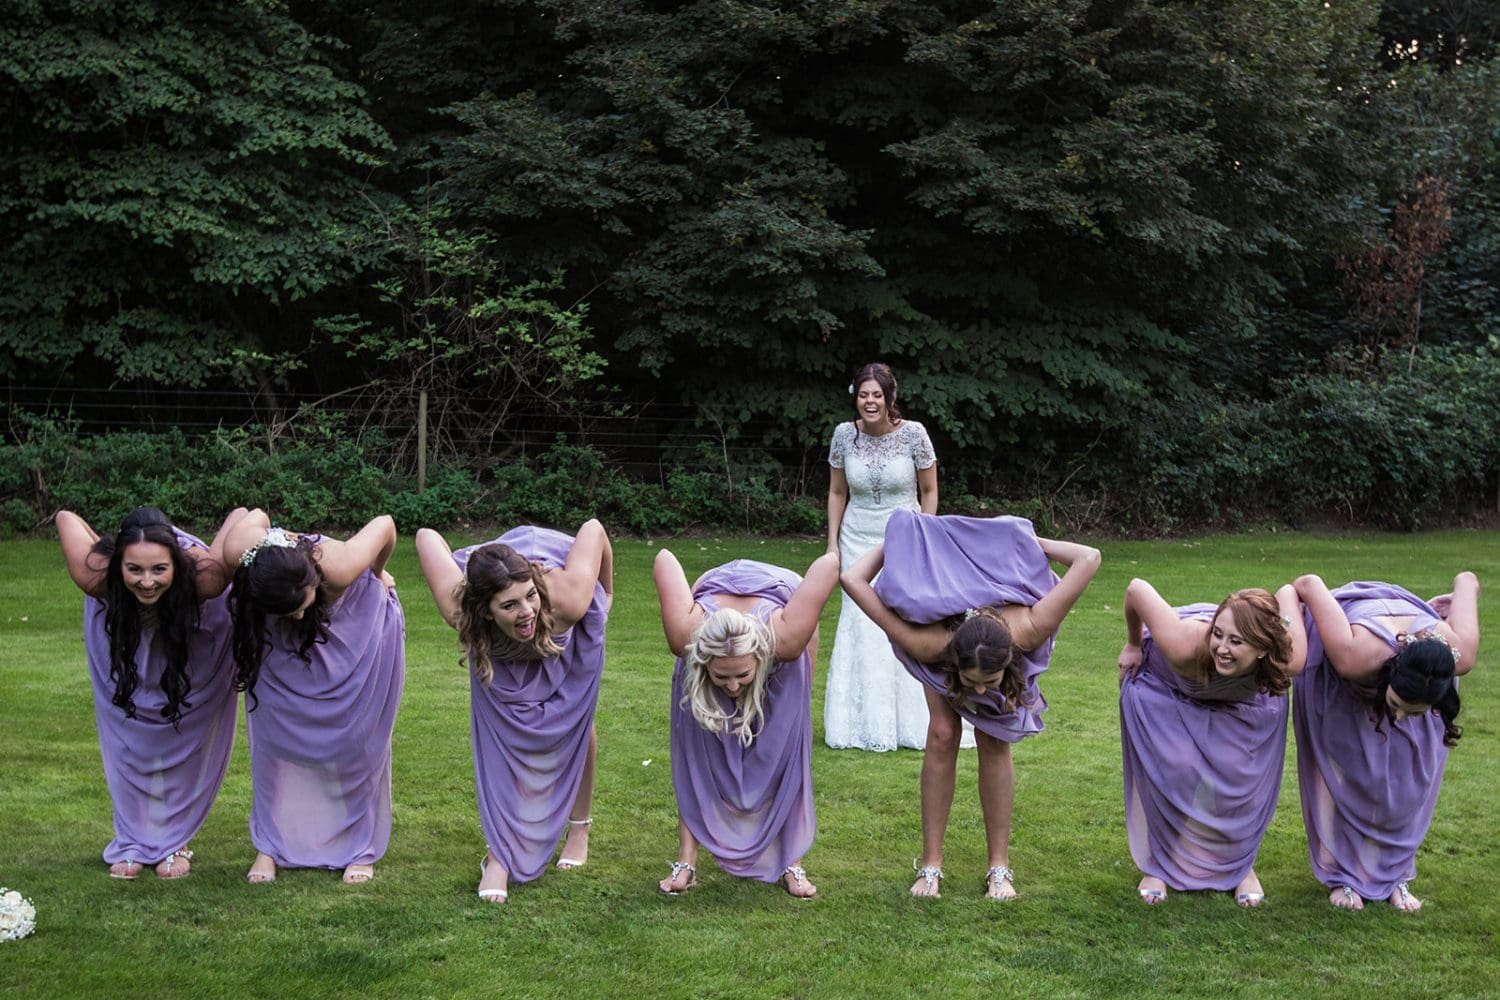 bridesmaids surprise their bride at a suffolk wedding by bending over and showing their bums. The bride laughs!